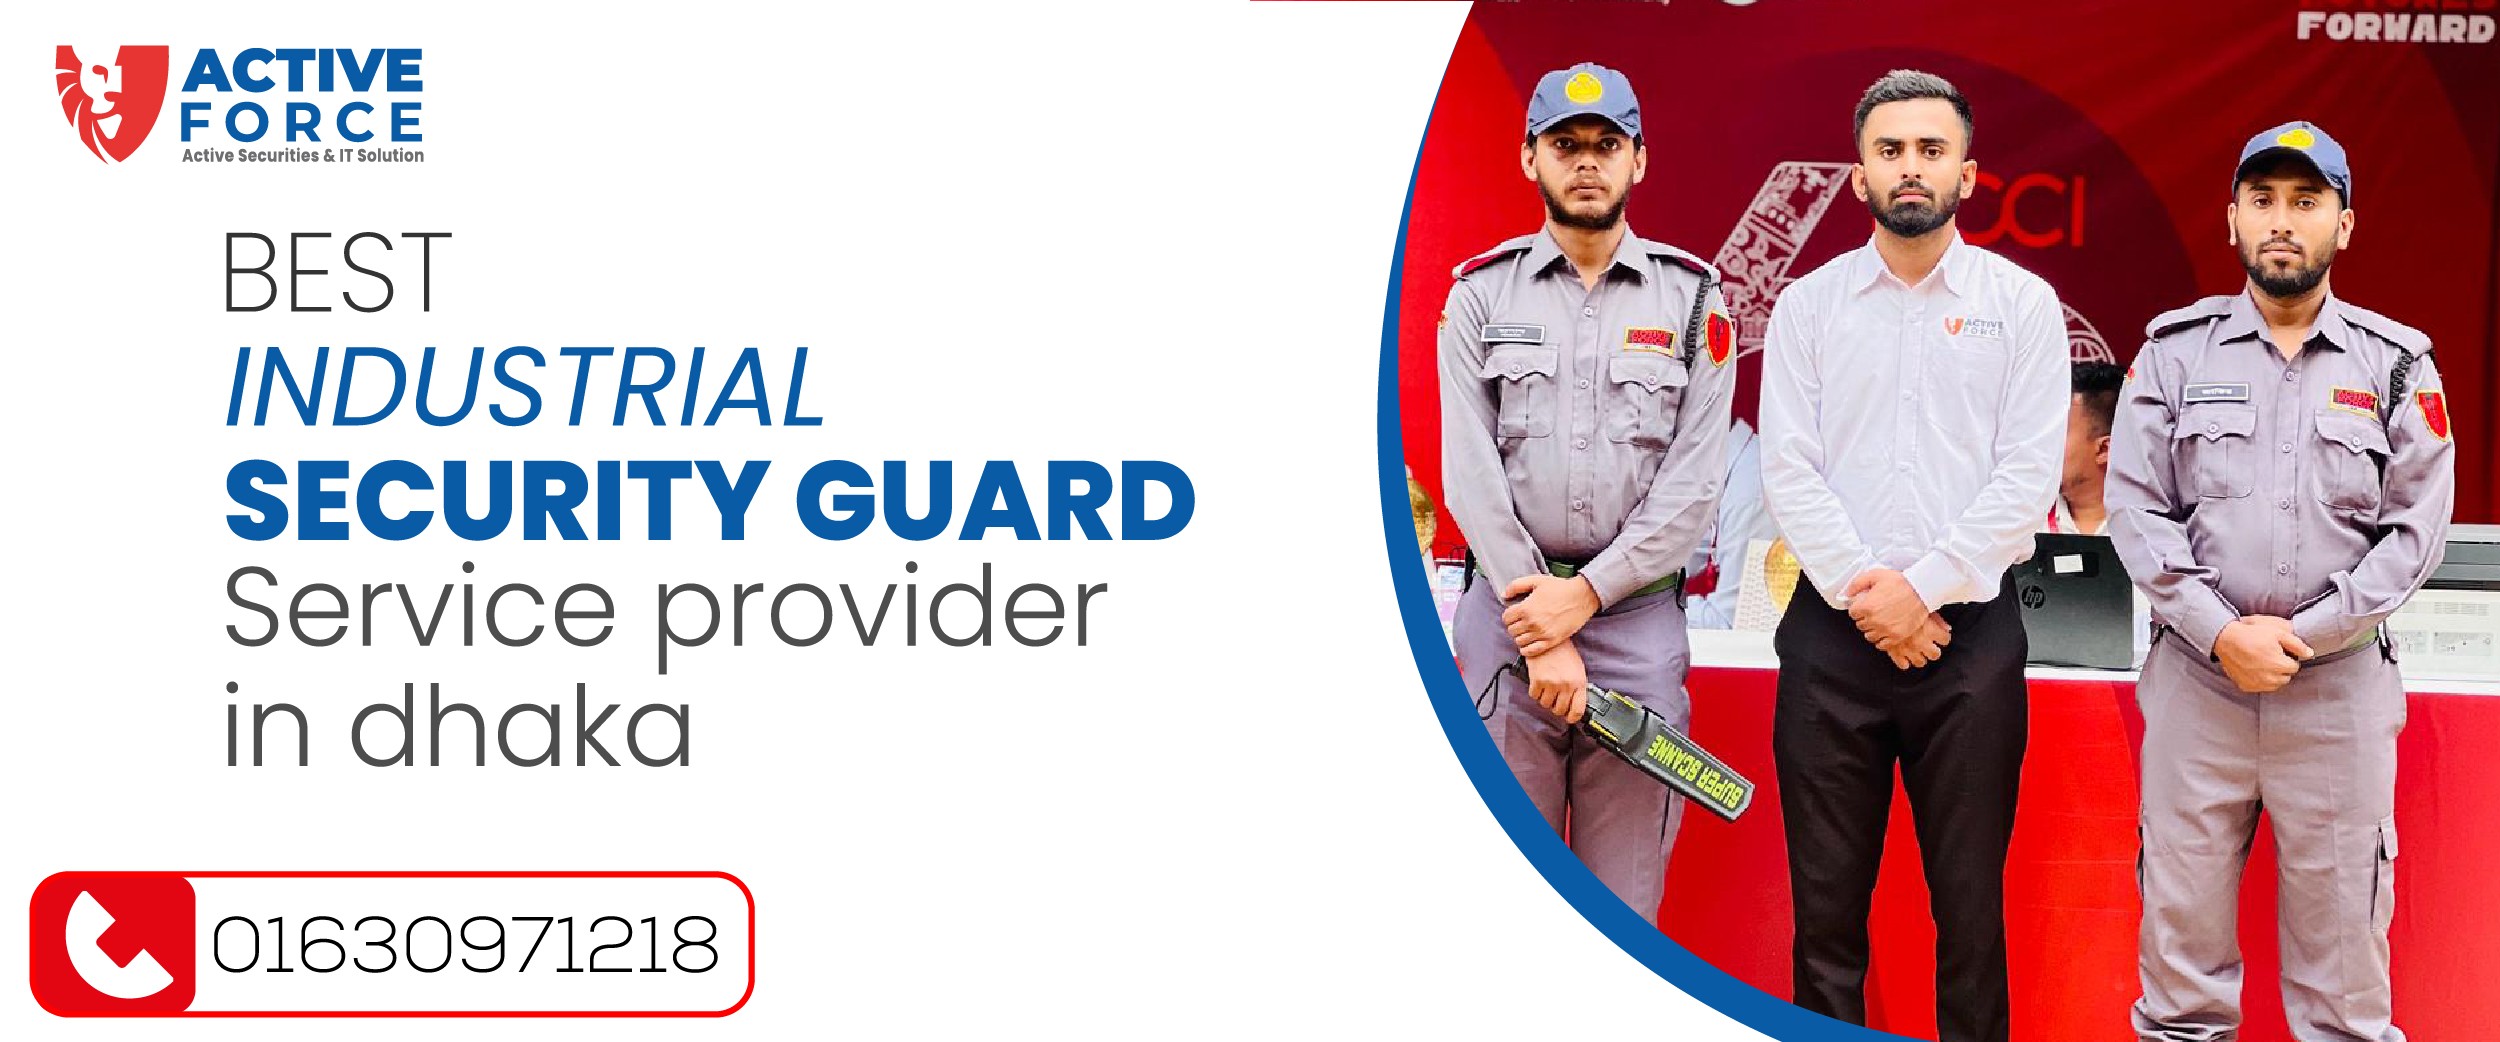 Best industrial security guard service provider in dhaka | Active Force